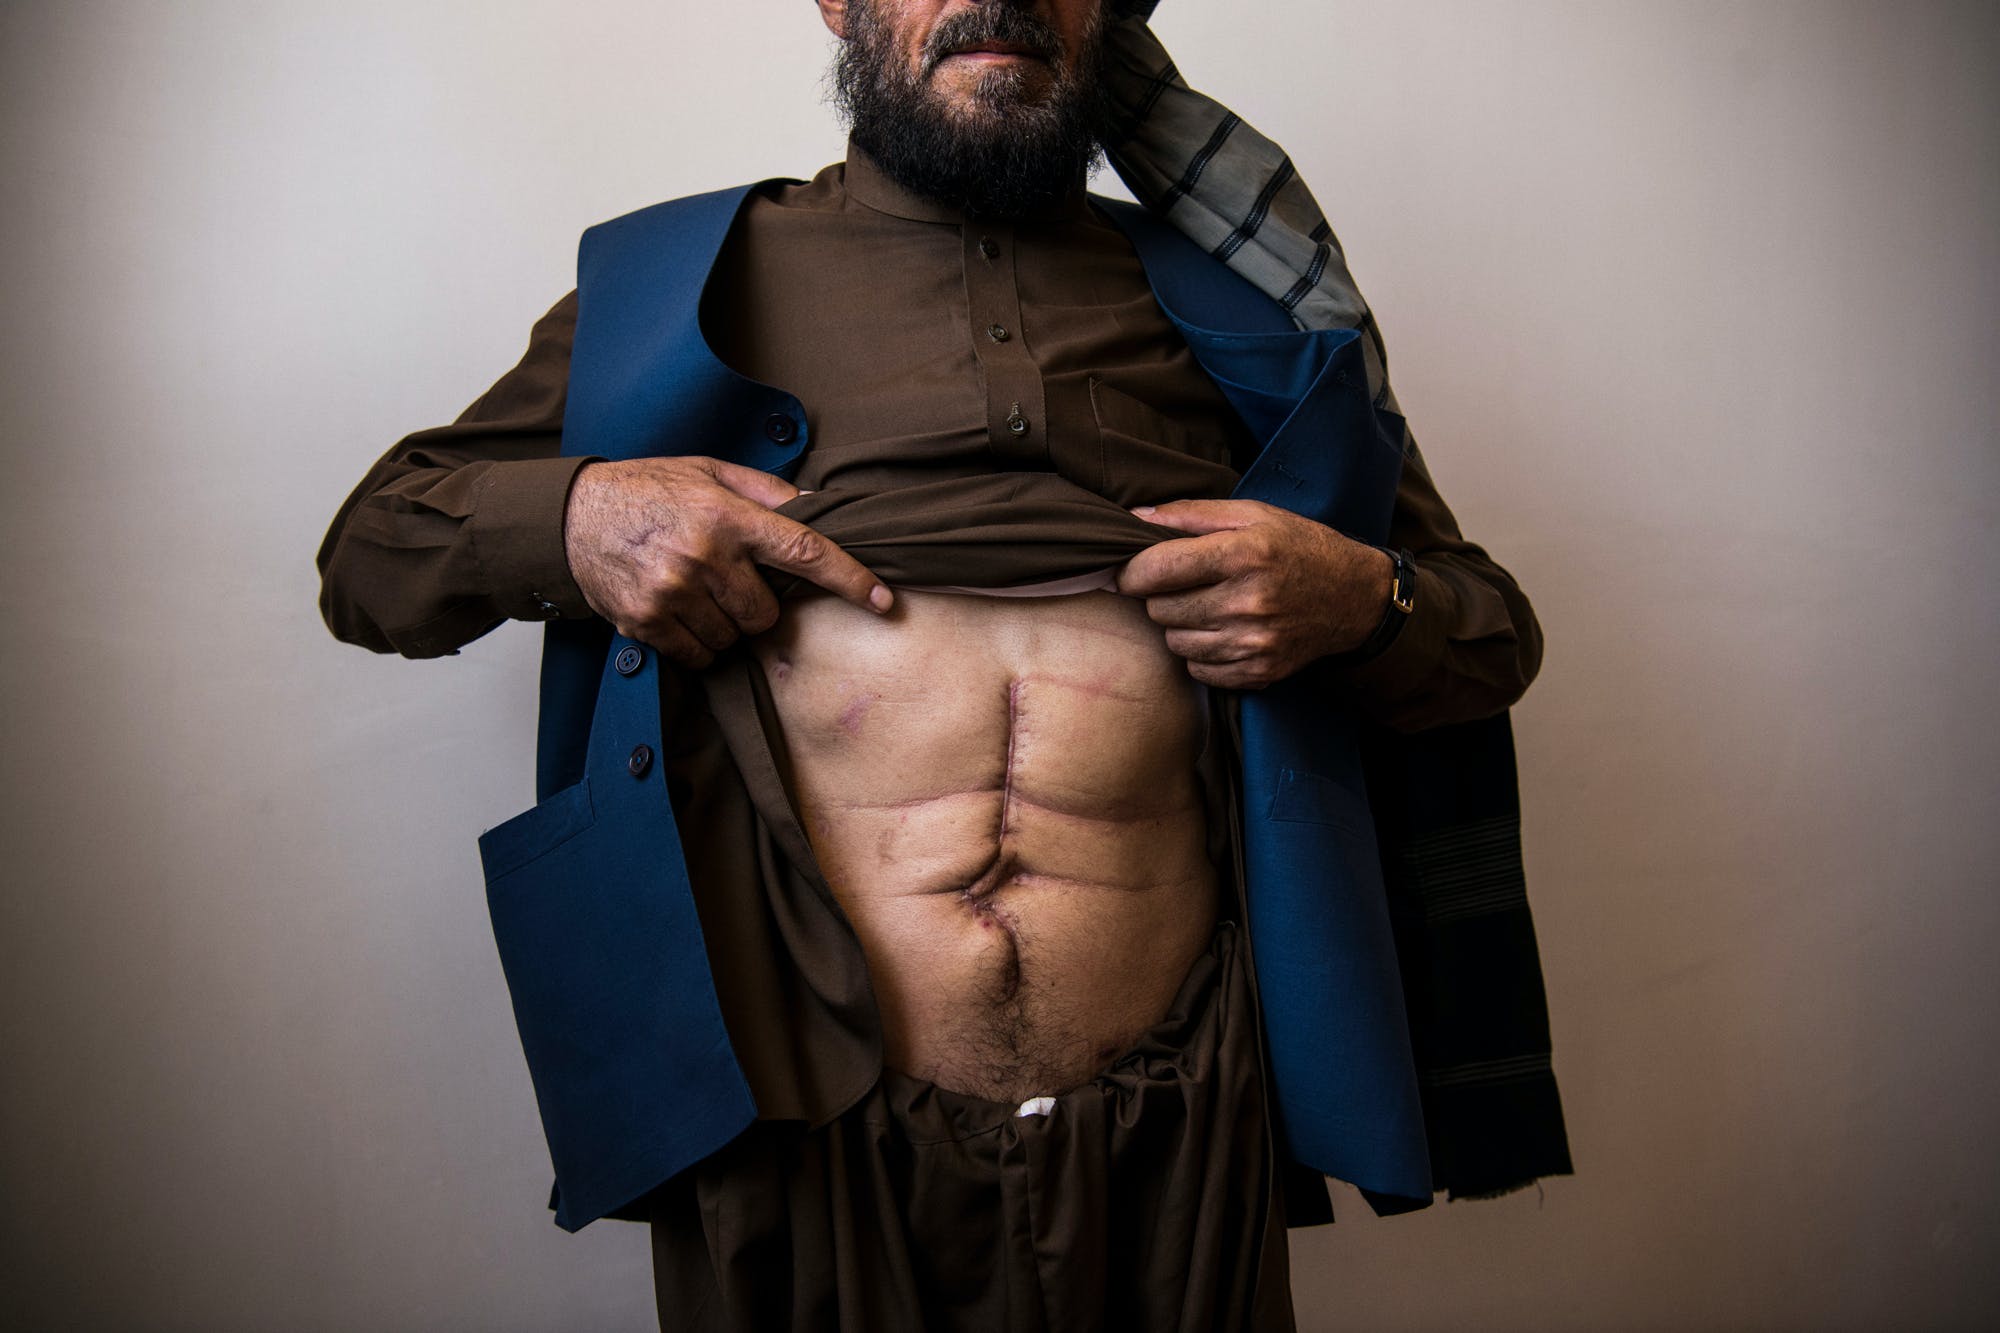 Ahmad Jamal, 56, shows scars from shrapnel wounds and subsequent surgeries from American air strikes on his family home in Sher Toghi on the night of March 2 and the morning of March 3, 2019. Ahmad Jamal lost his wife and three of his seven children in the attack. He and several surviving children were flown to an NDS hospital in Kabul, where he says they were given rudimentary medical care, refused pain medication, and chained to beds. Three days later, they were dumped by the side of the road near the Kabul Intercontinental Hotel.